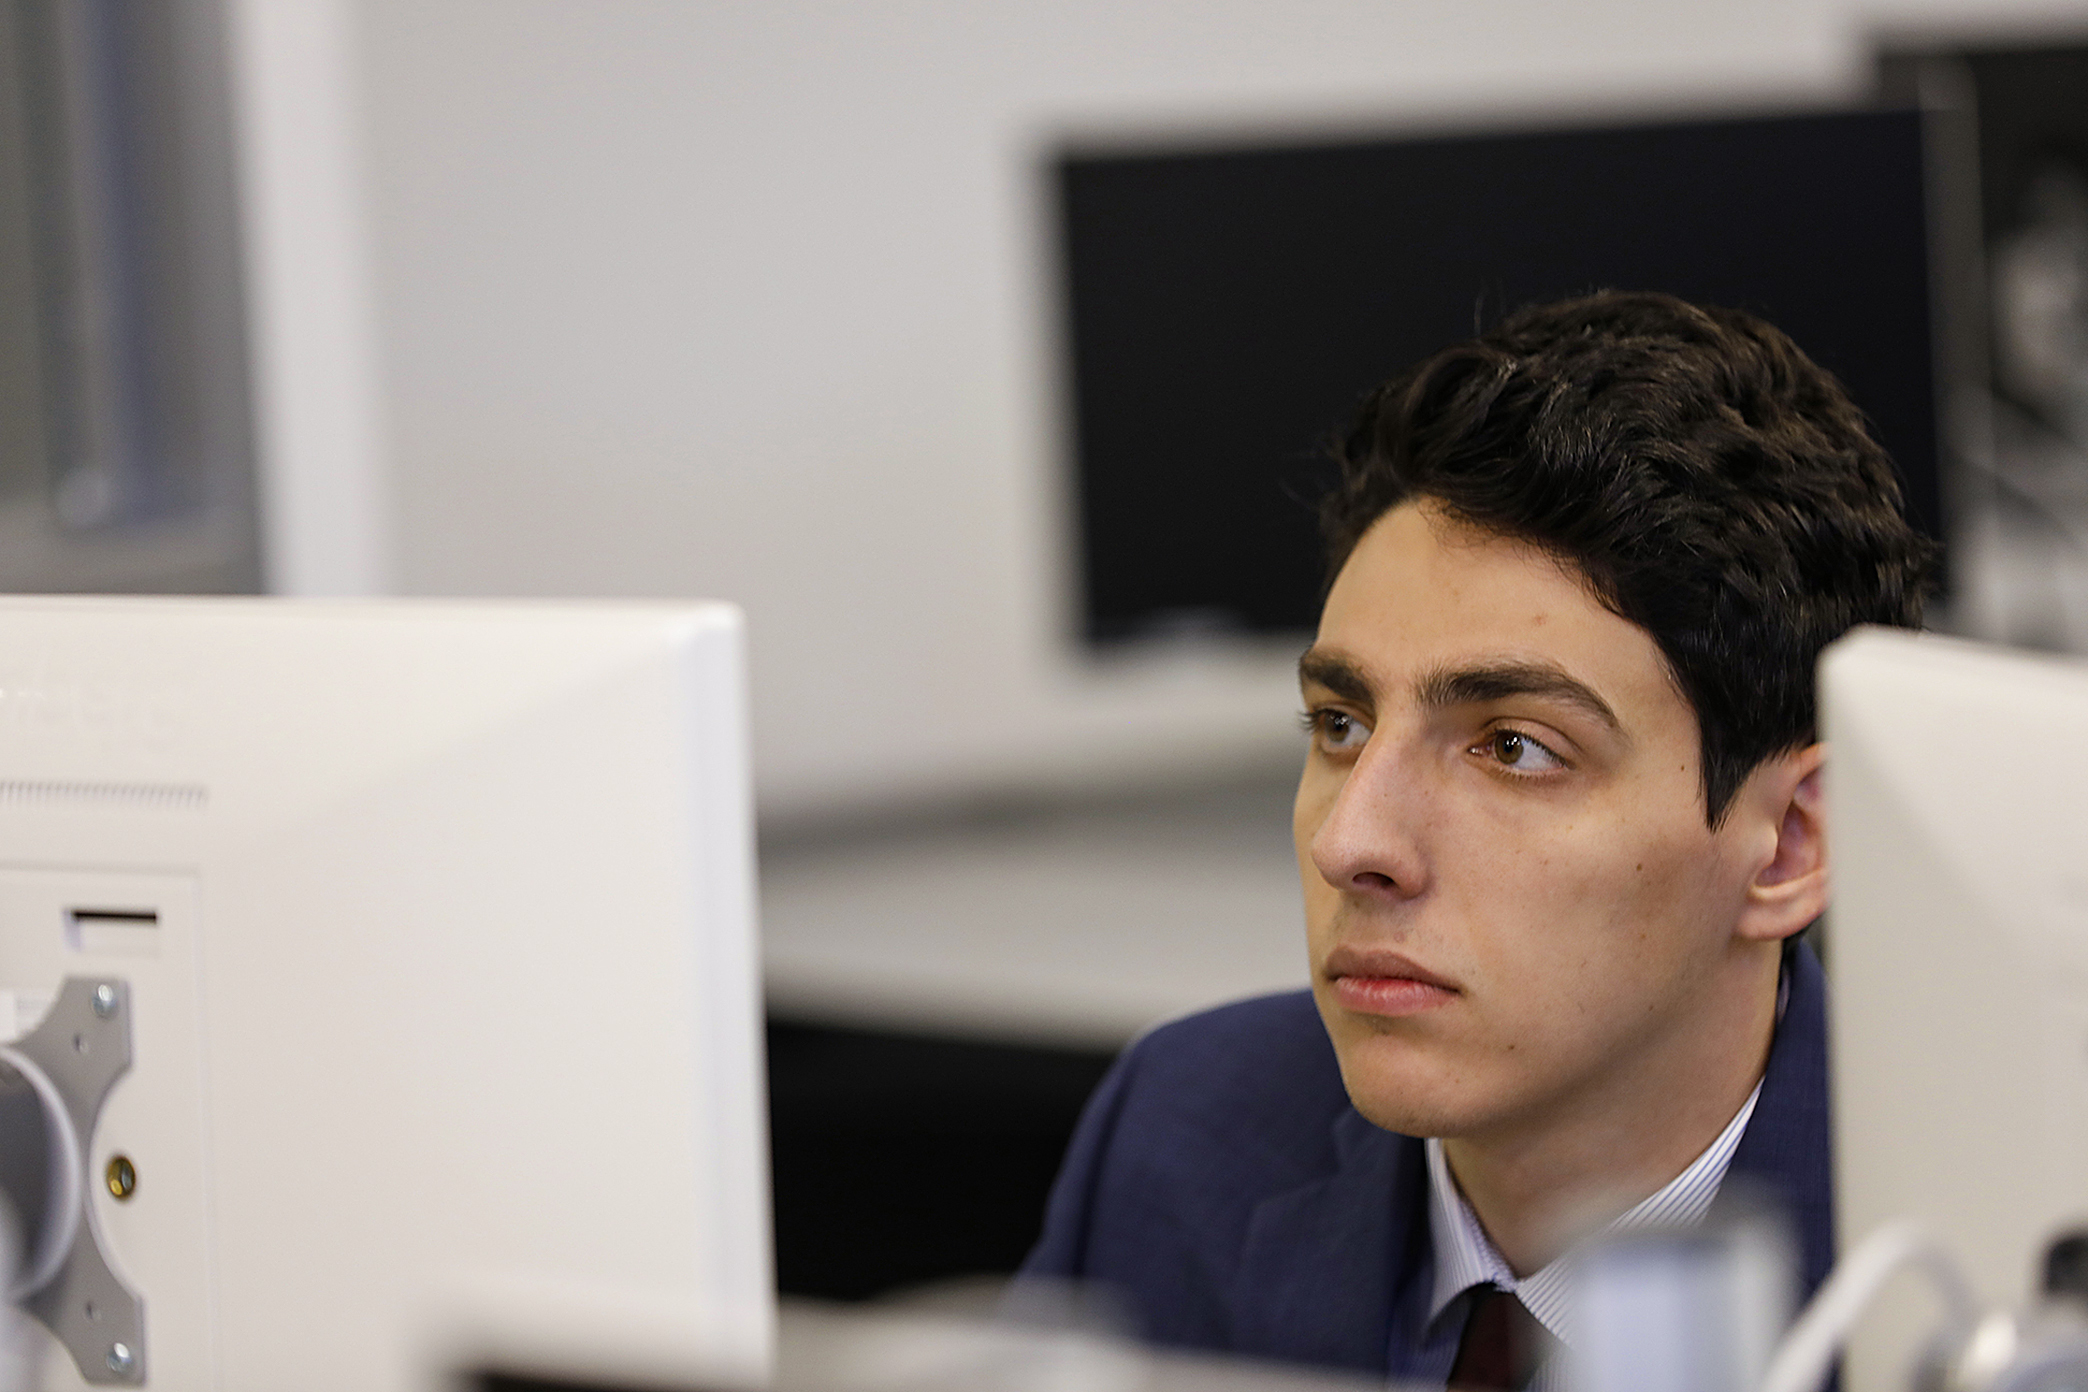 A male student sitting at a desk in front of a computer.